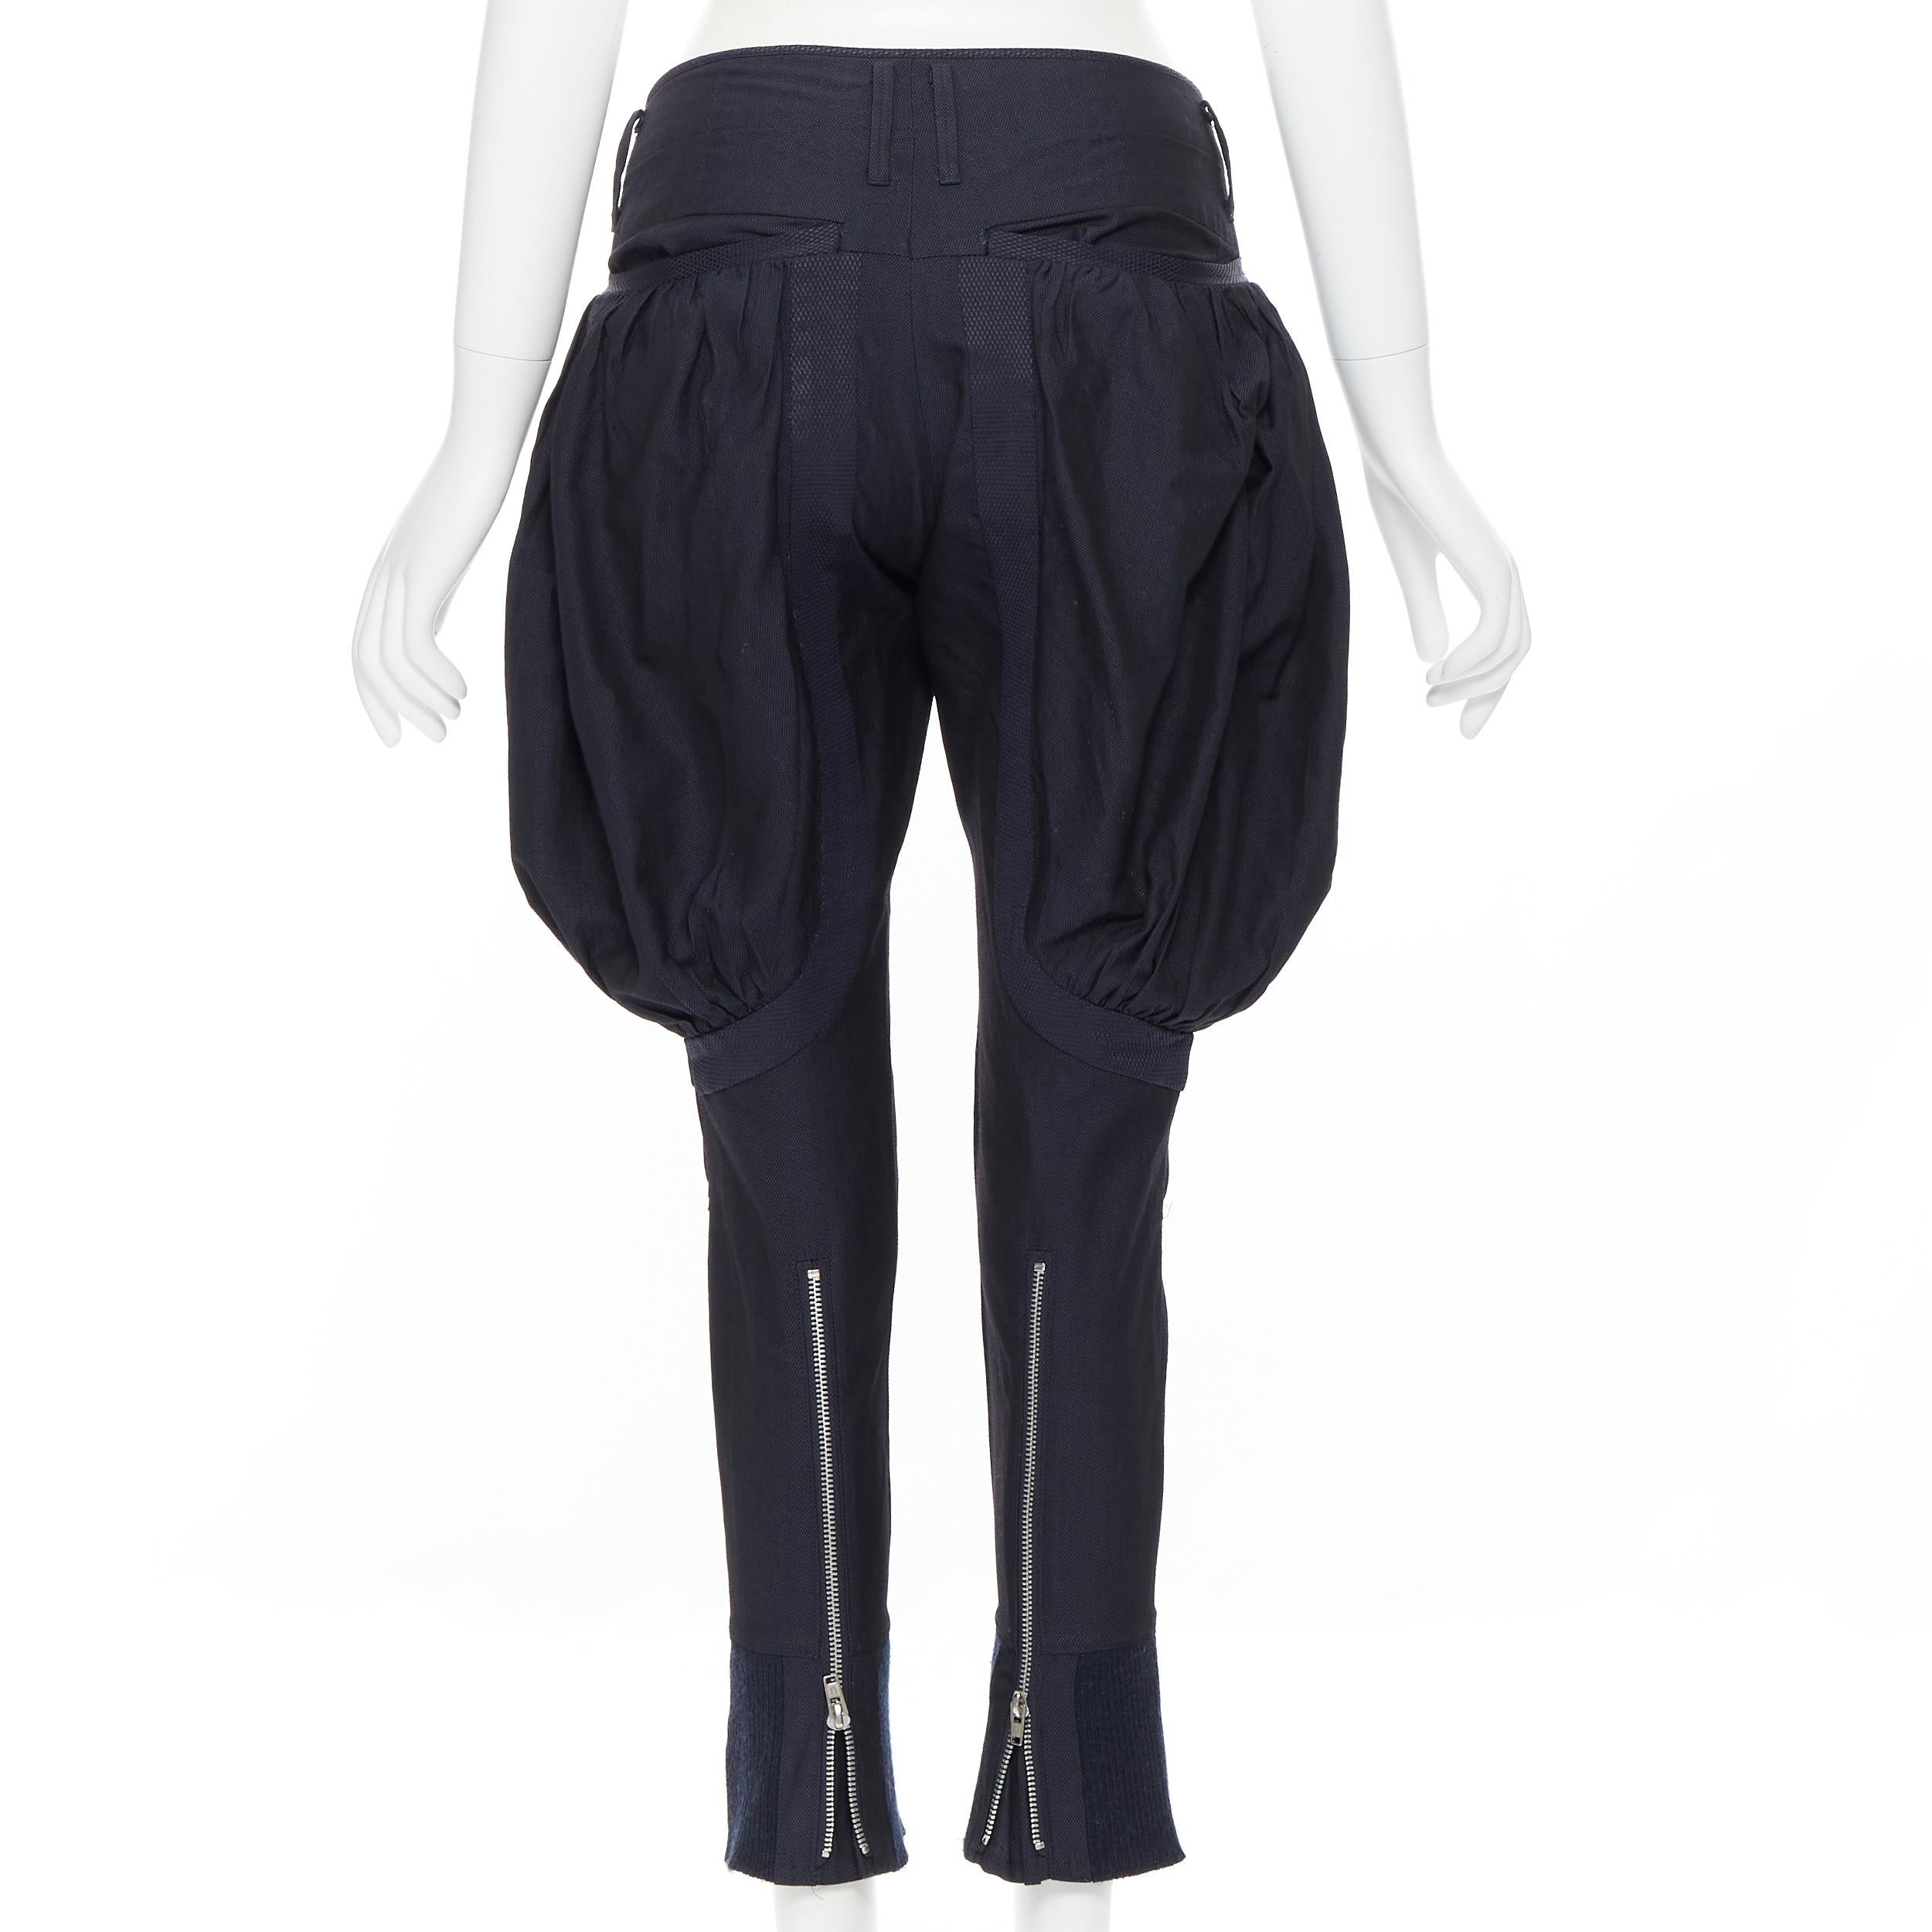 Women's UNDERCOVER navy wool silk pleated exaggerated pockets jodphur riding pants M